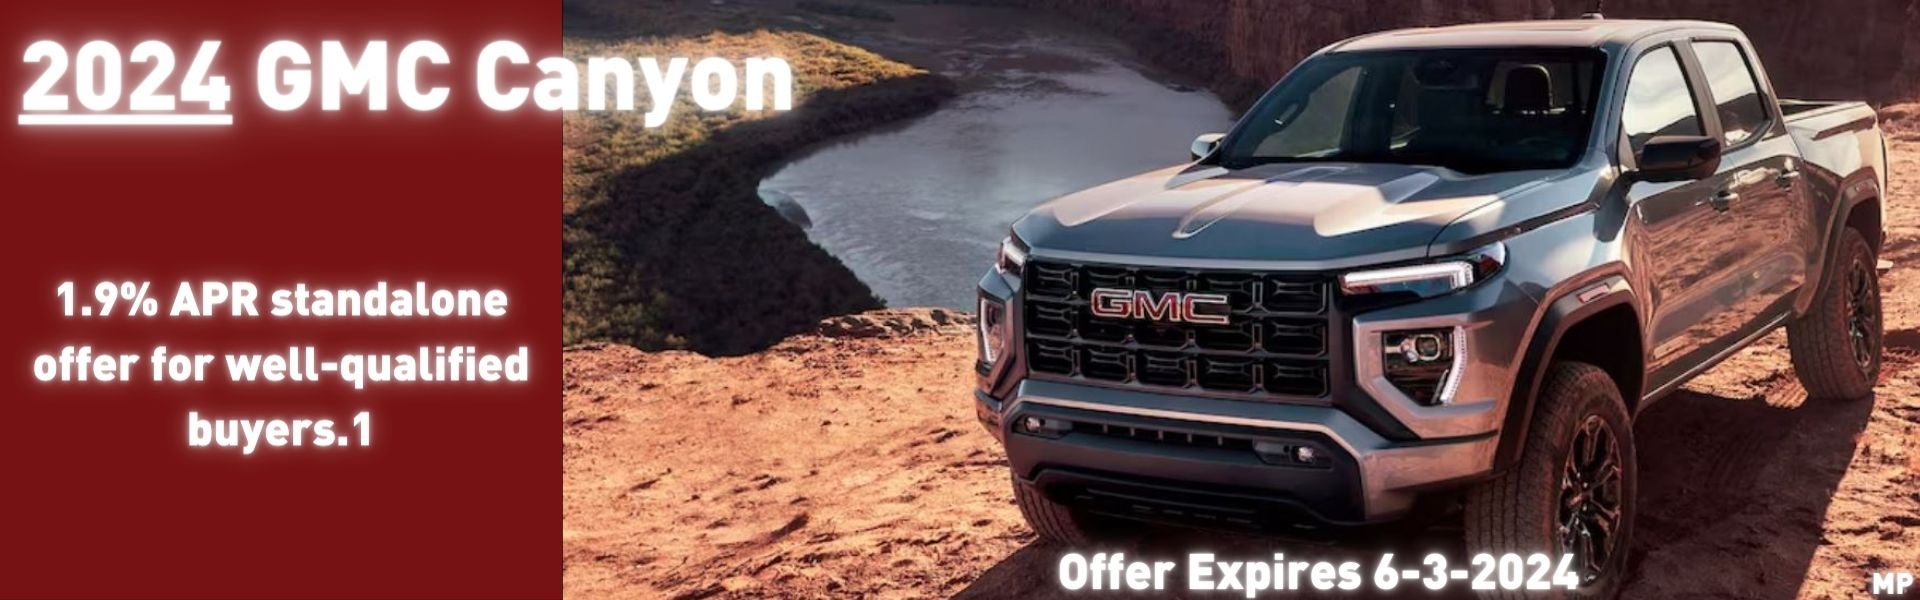 2023 GMC Canyon Reveal - Coming soon!